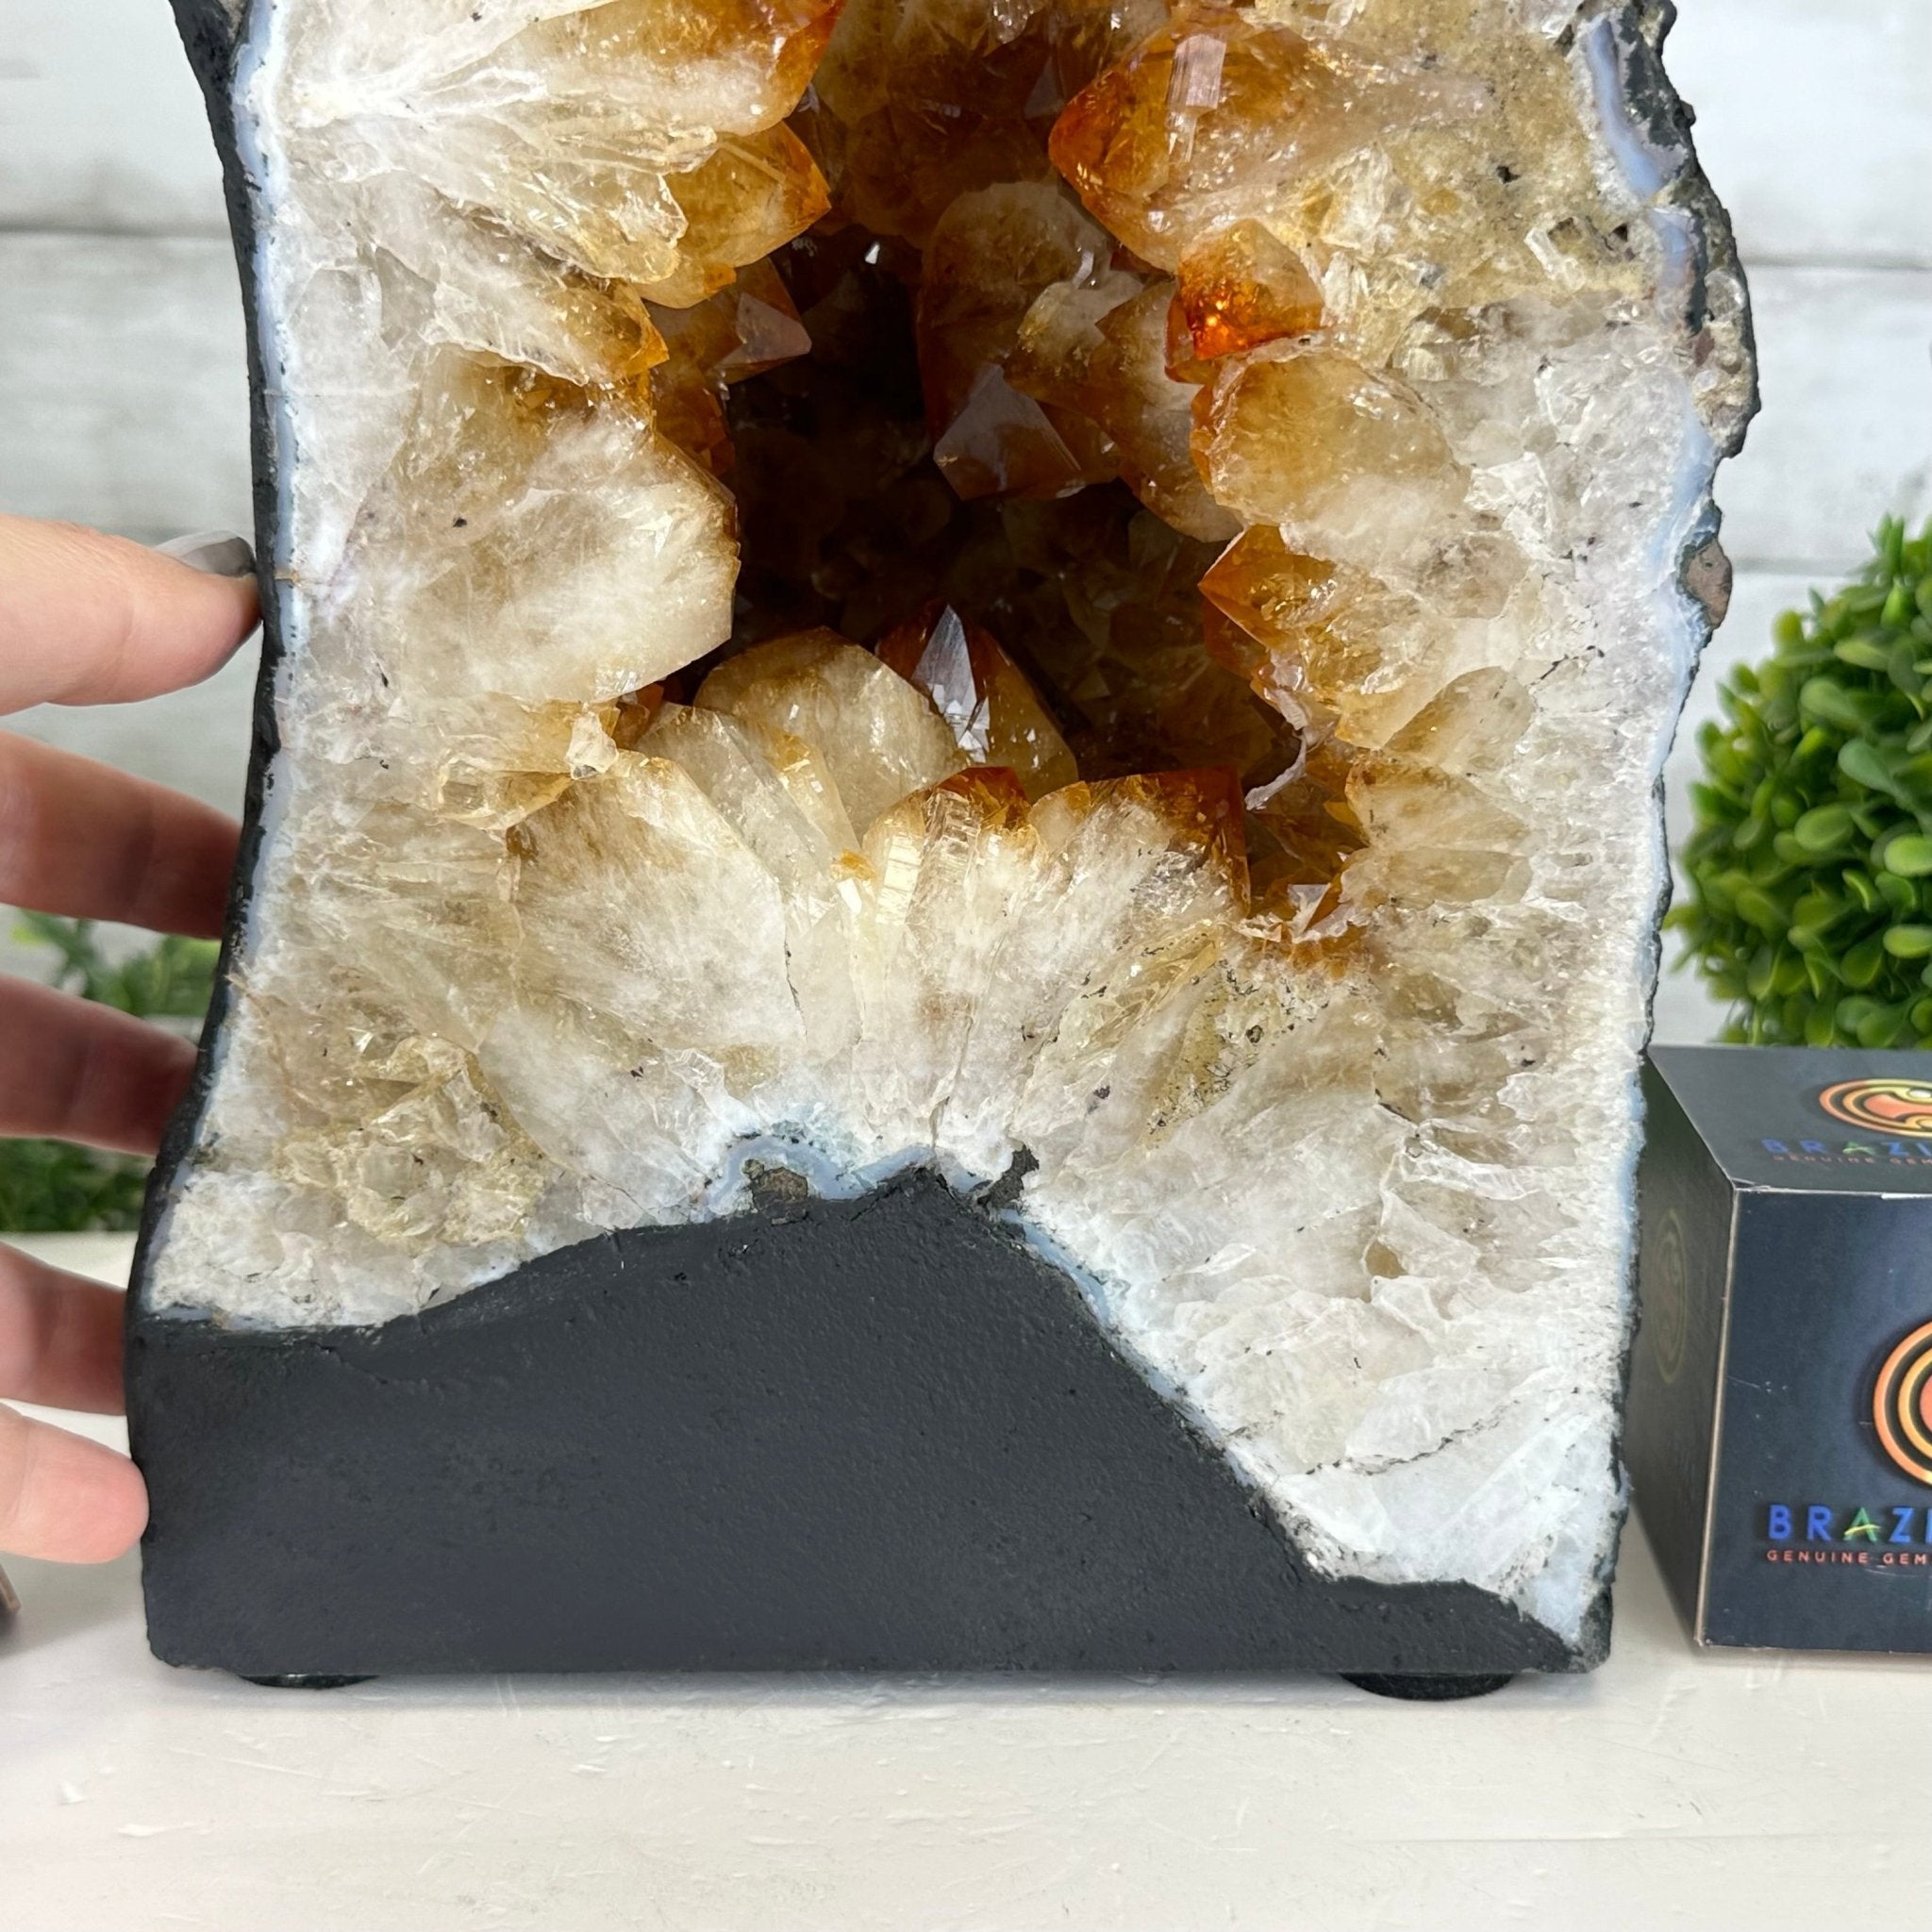 Extra Quality Citrine Cathedral, 25.8 lbs & 11.7" Tall #5603-0291 - Brazil GemsBrazil GemsExtra Quality Citrine Cathedral, 25.8 lbs & 11.7" Tall #5603-0291Cathedrals5603-0291